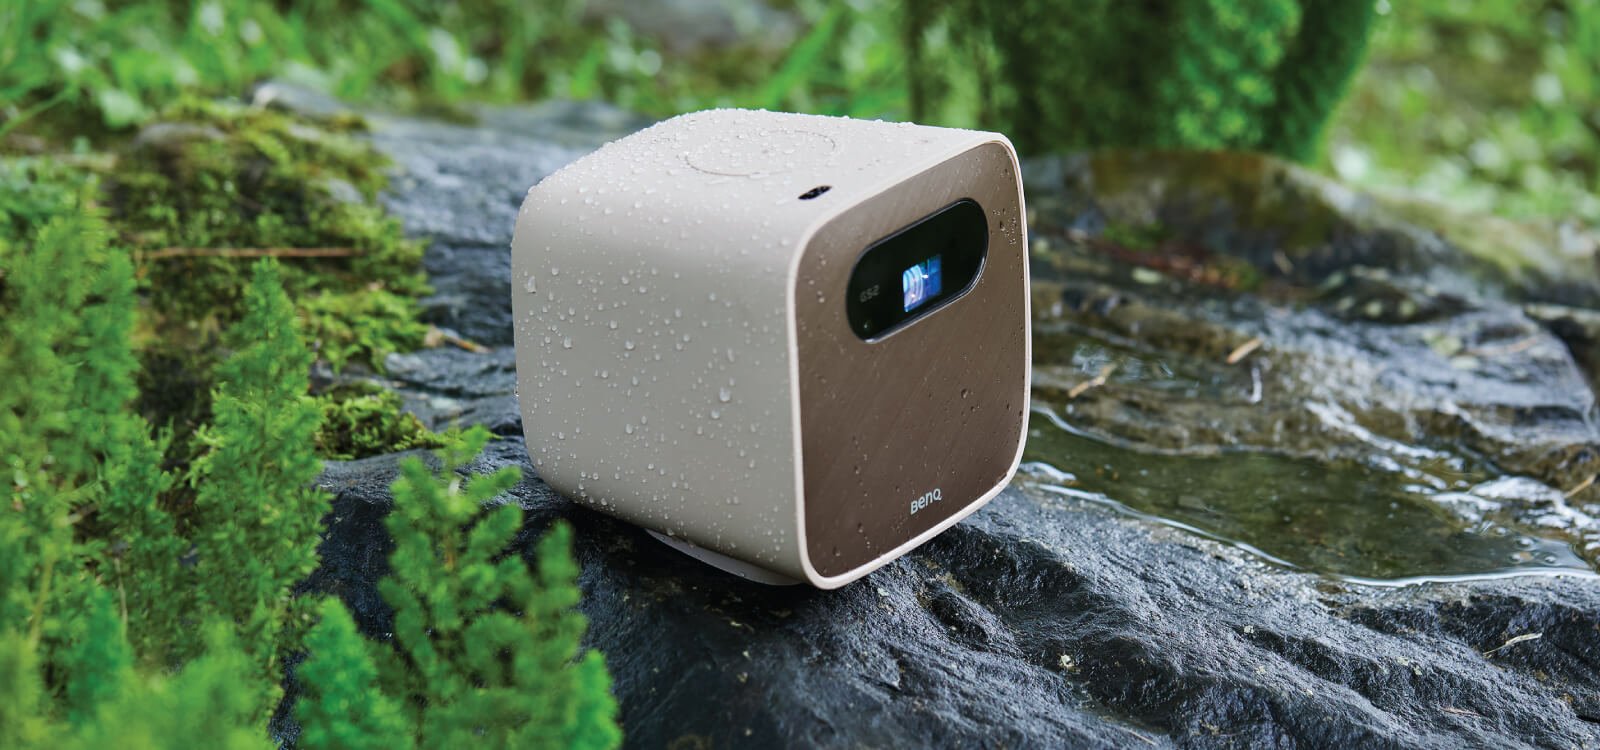 BenQ Wireless Portable LED Projector for Outdoor Family Entertainment | GS2 / Splash-proof, drop-proof, Bluetooth speaker